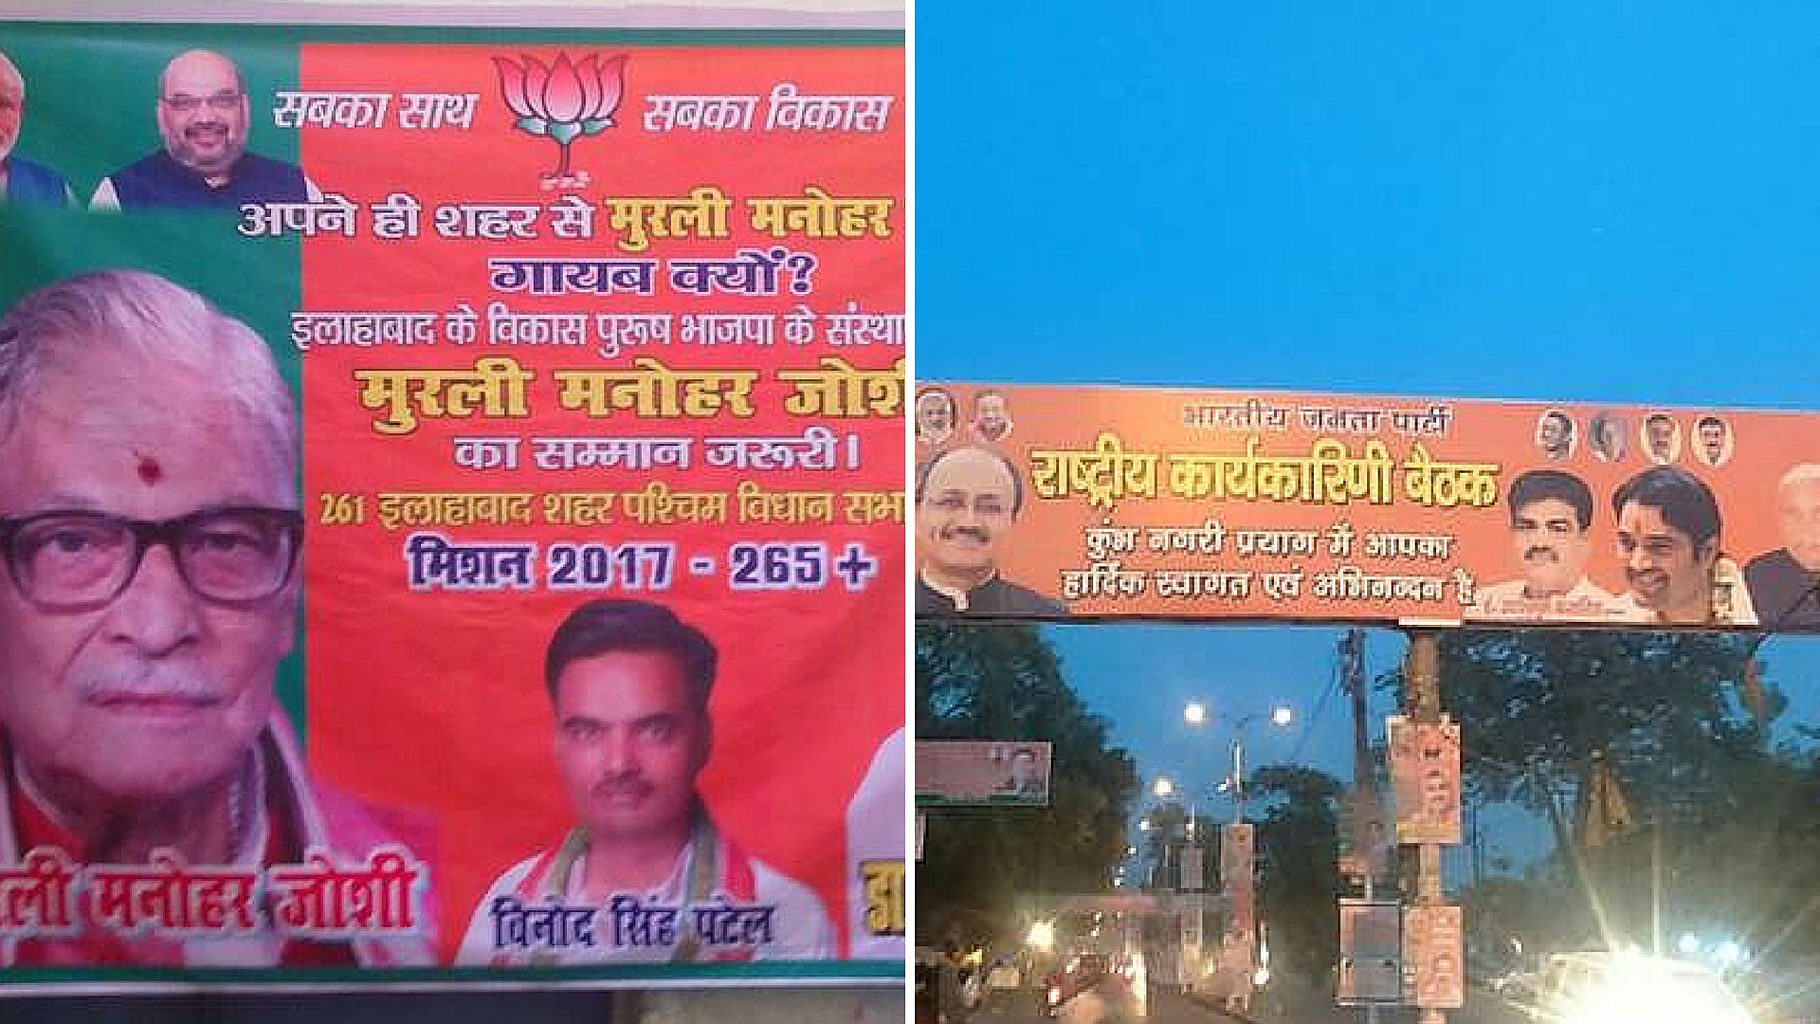 Posters seen in Allahabad (UP) ahead of BJP National Executive Meeting in Allahabad on 12 and 13 June. (Photo: ANI)